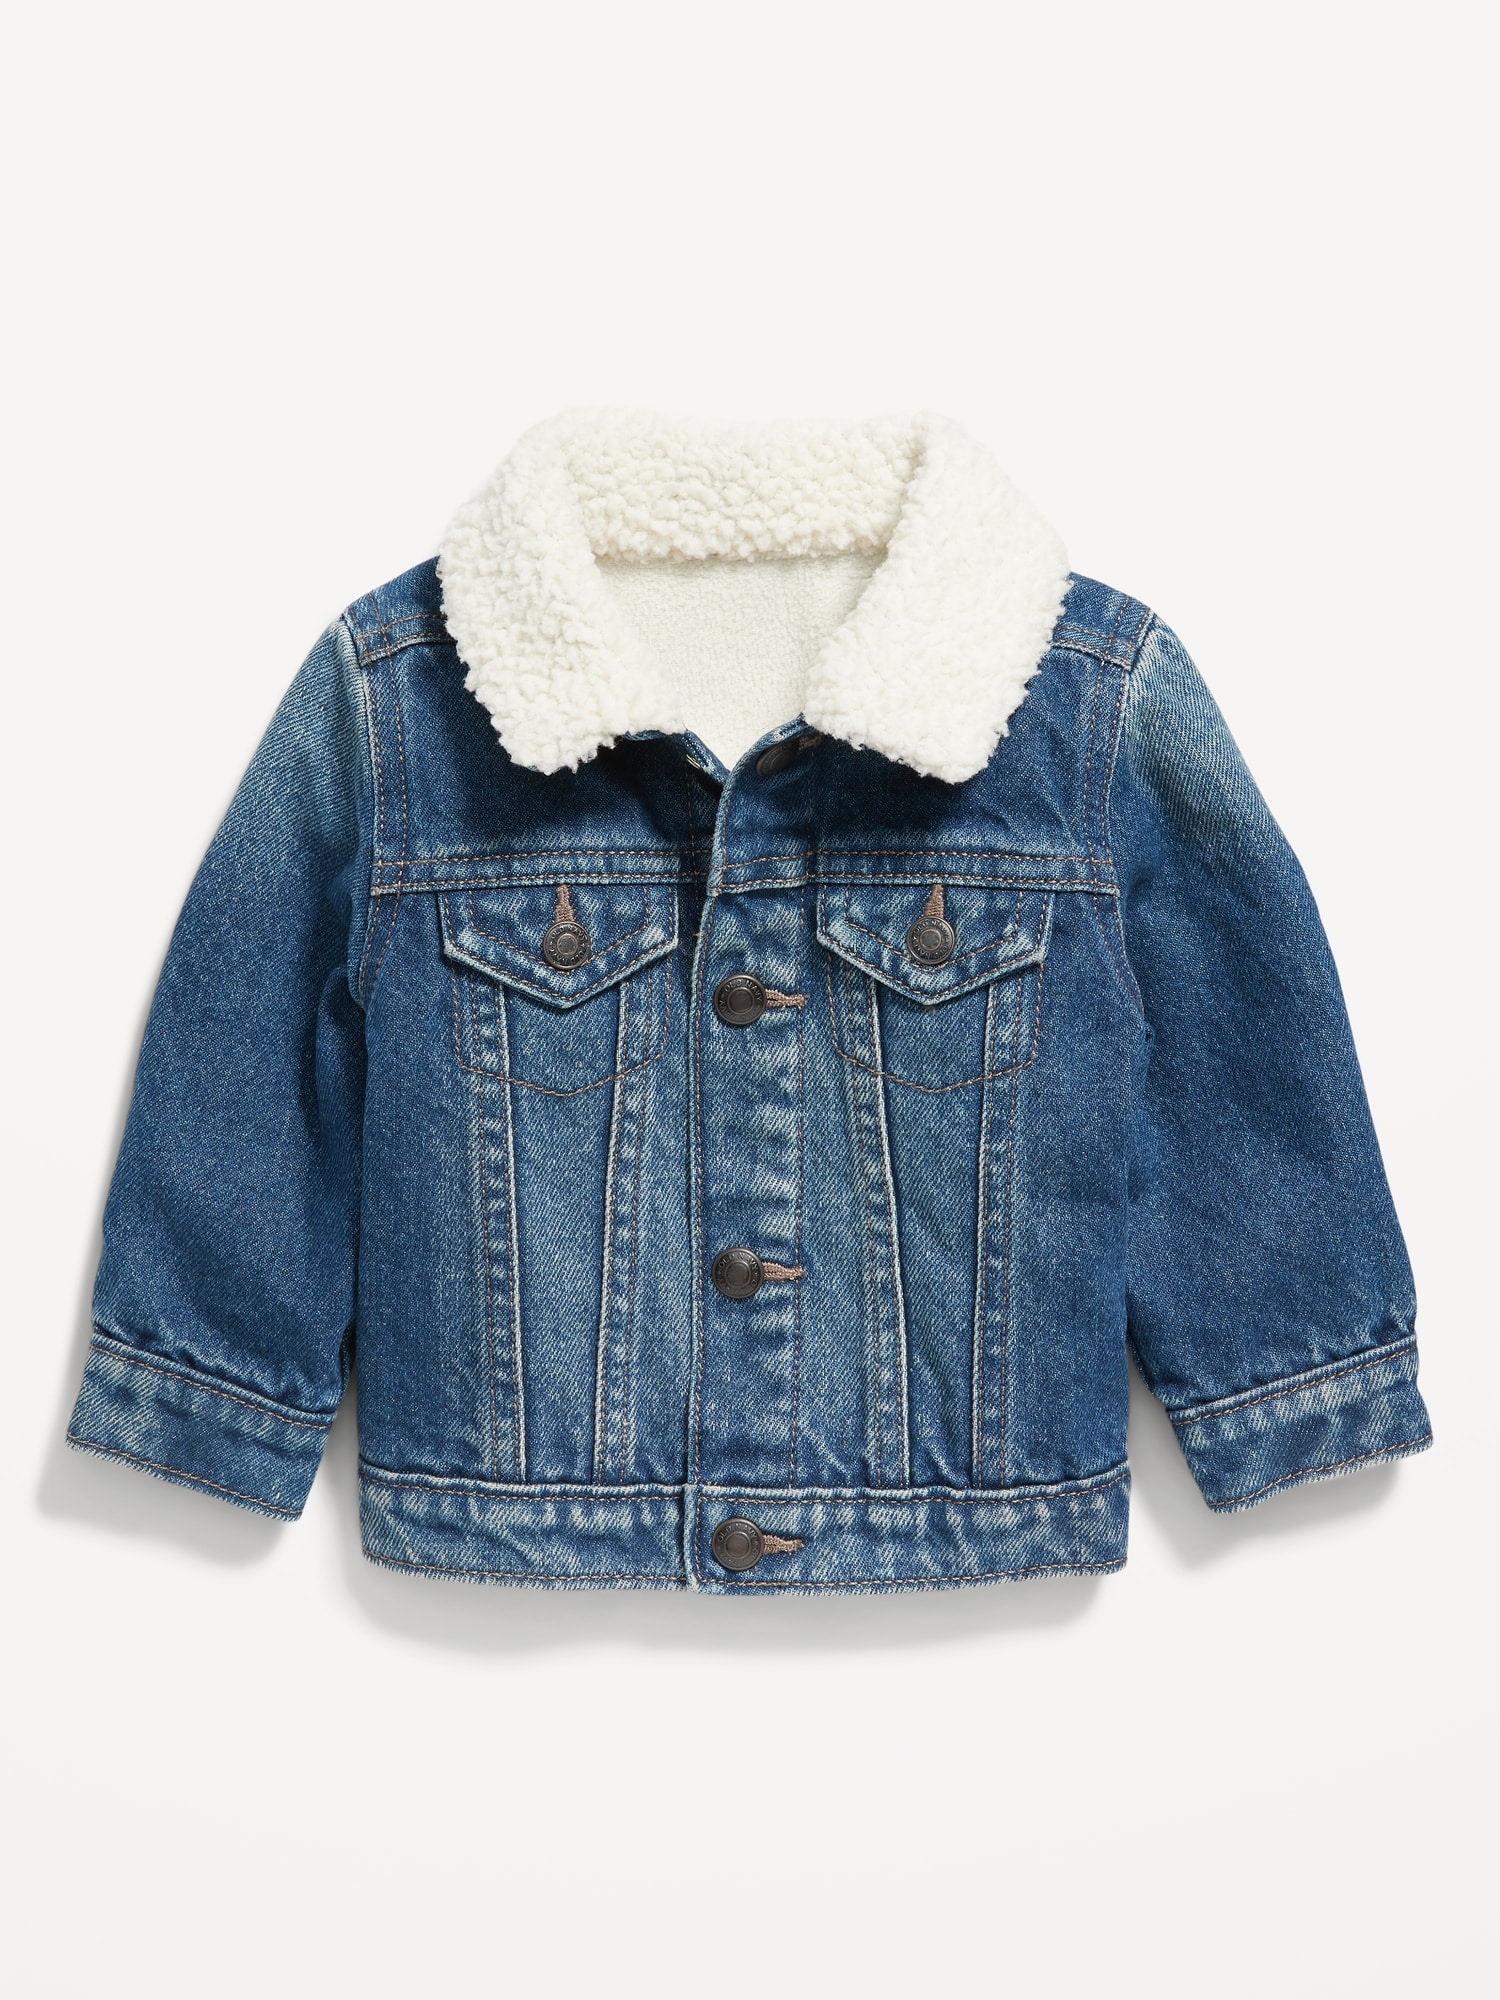 Unisex Sherpa-Lined Non-Stretch Jean Jacket for Baby | Old Navy